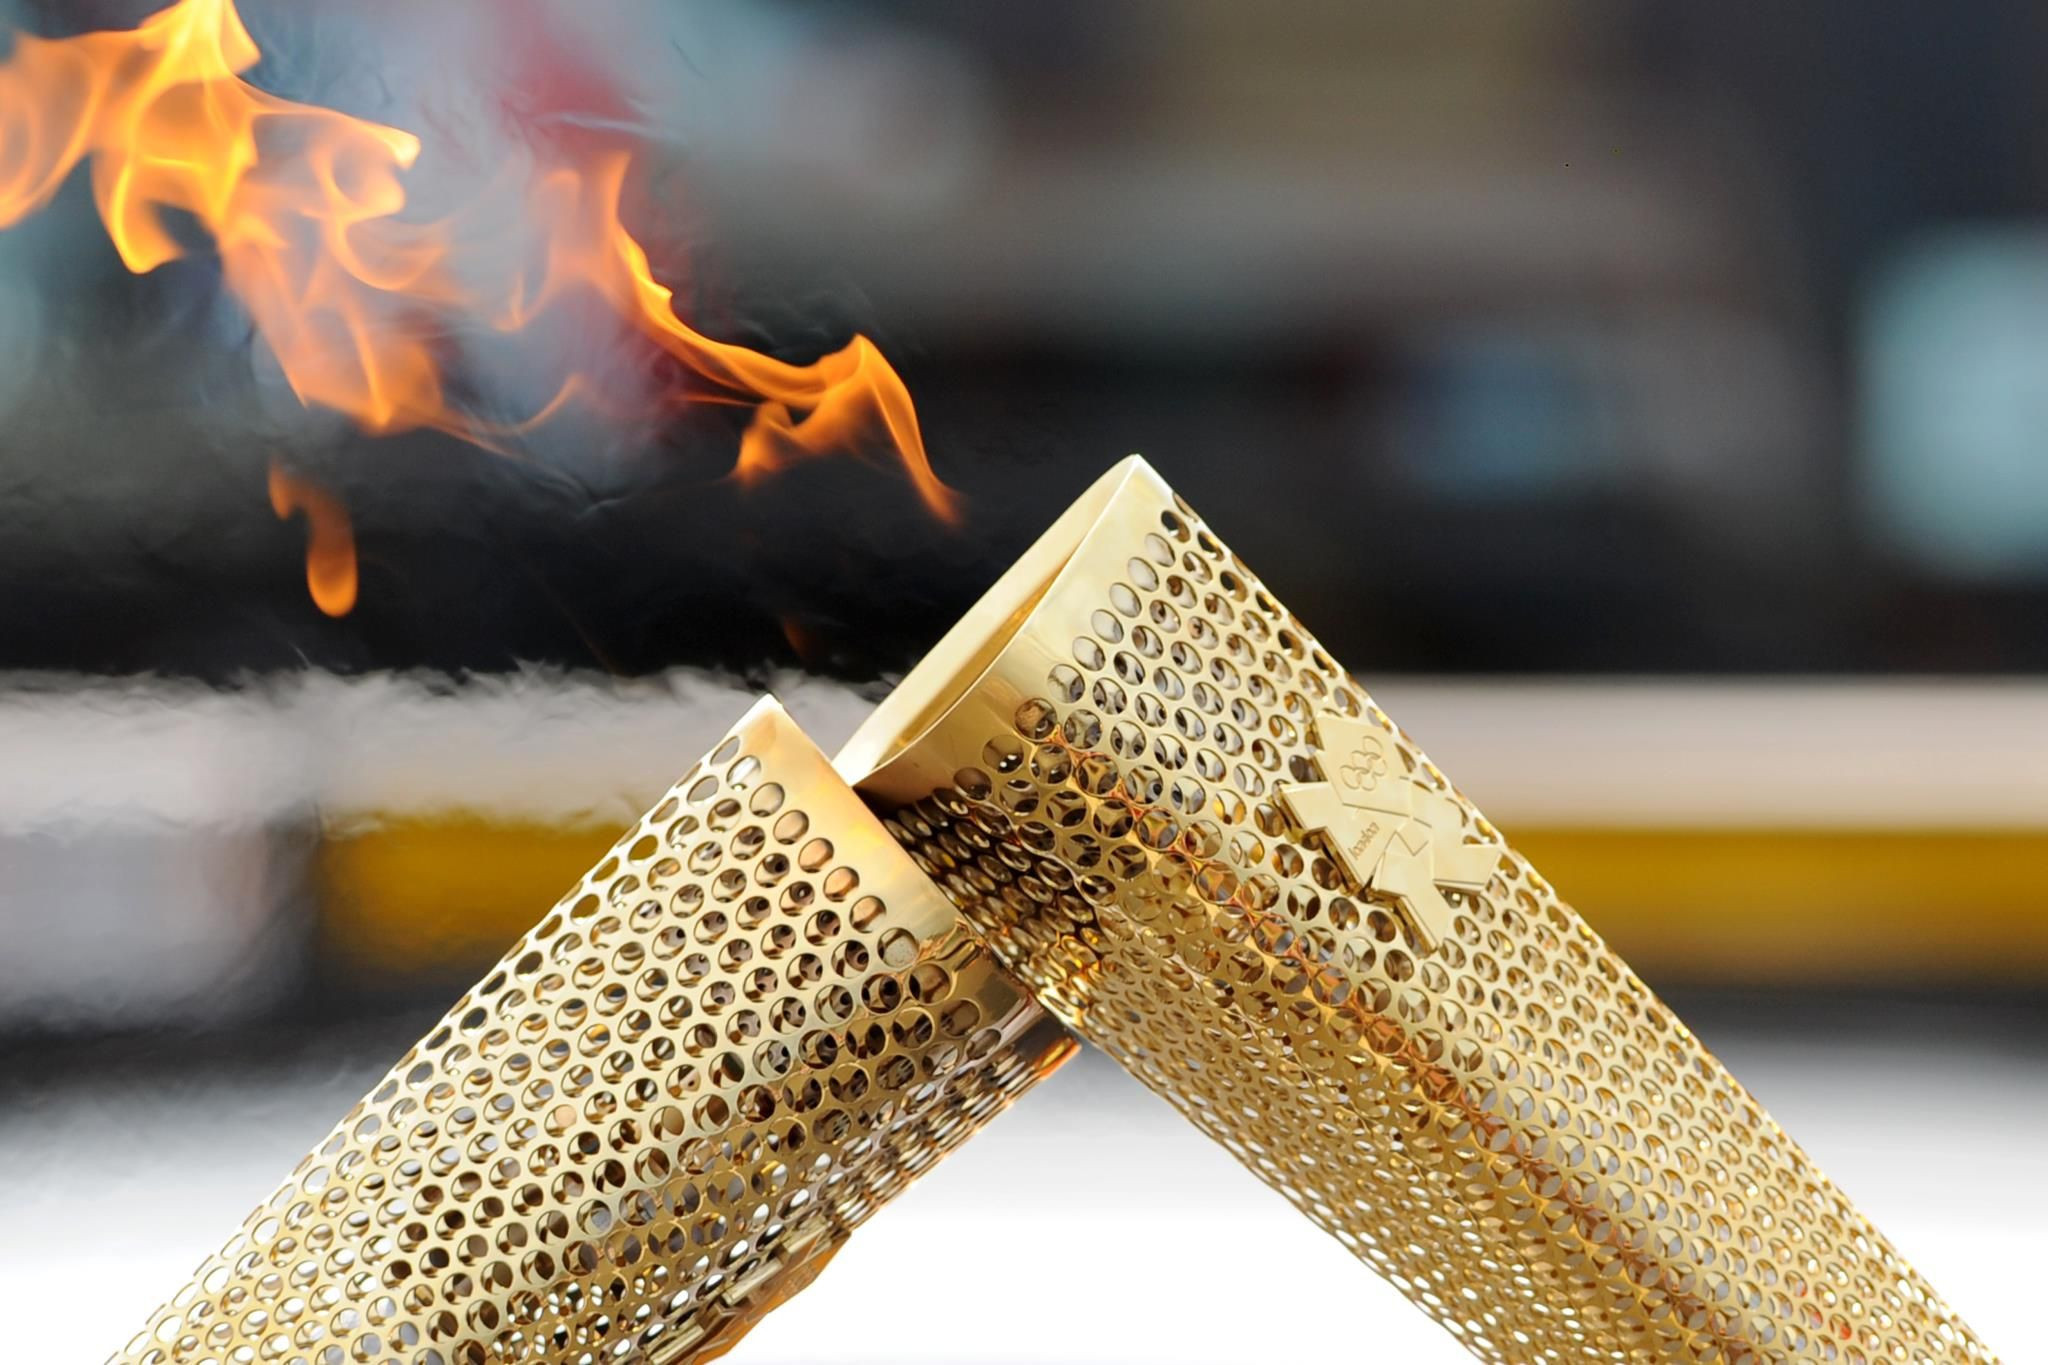 London 2012 Torch manufacturer forced out of business by coronavirus